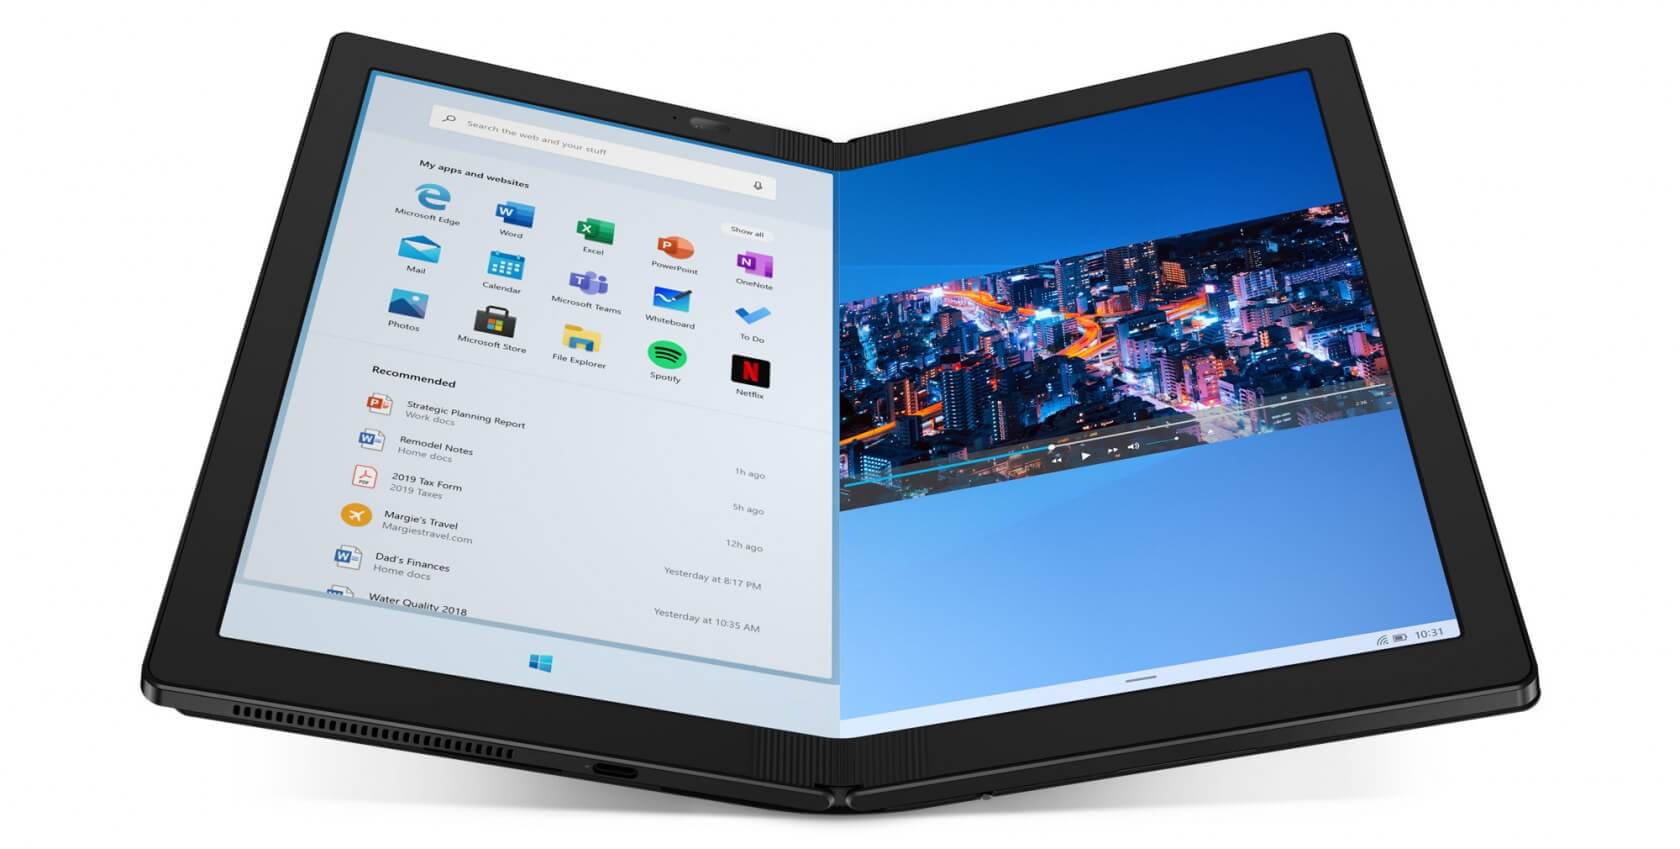 Lenovo's ThinkPad X1 Fold is the 'world's first' foldable PC with a $2,499 price tag